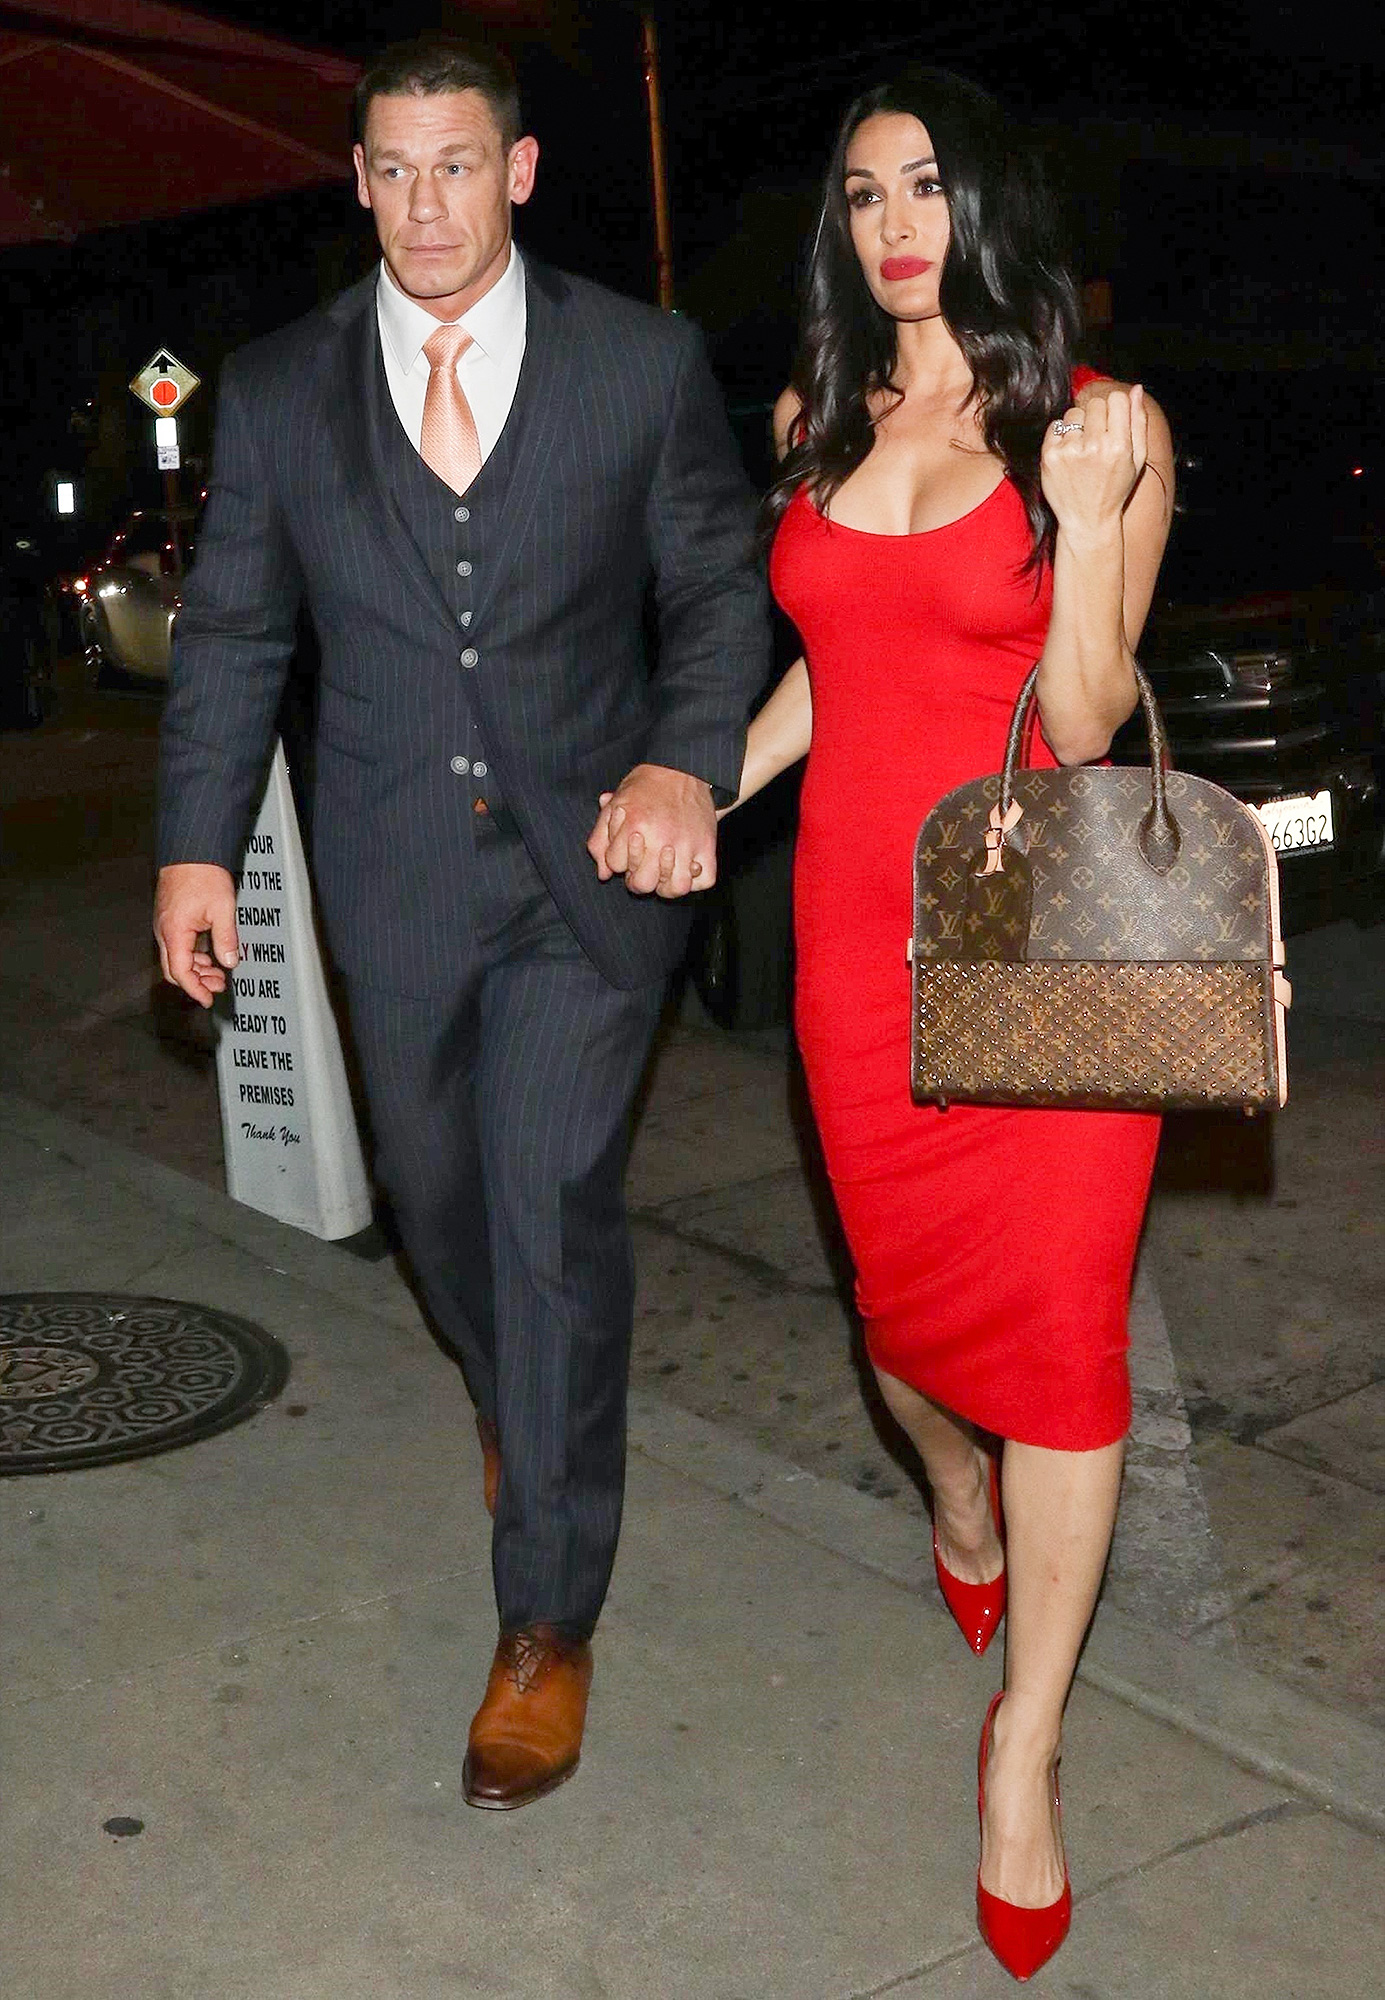 You Can’t See Me: John Cena And Nikki Bella Break Up After 6 Long Years1385 x 2000